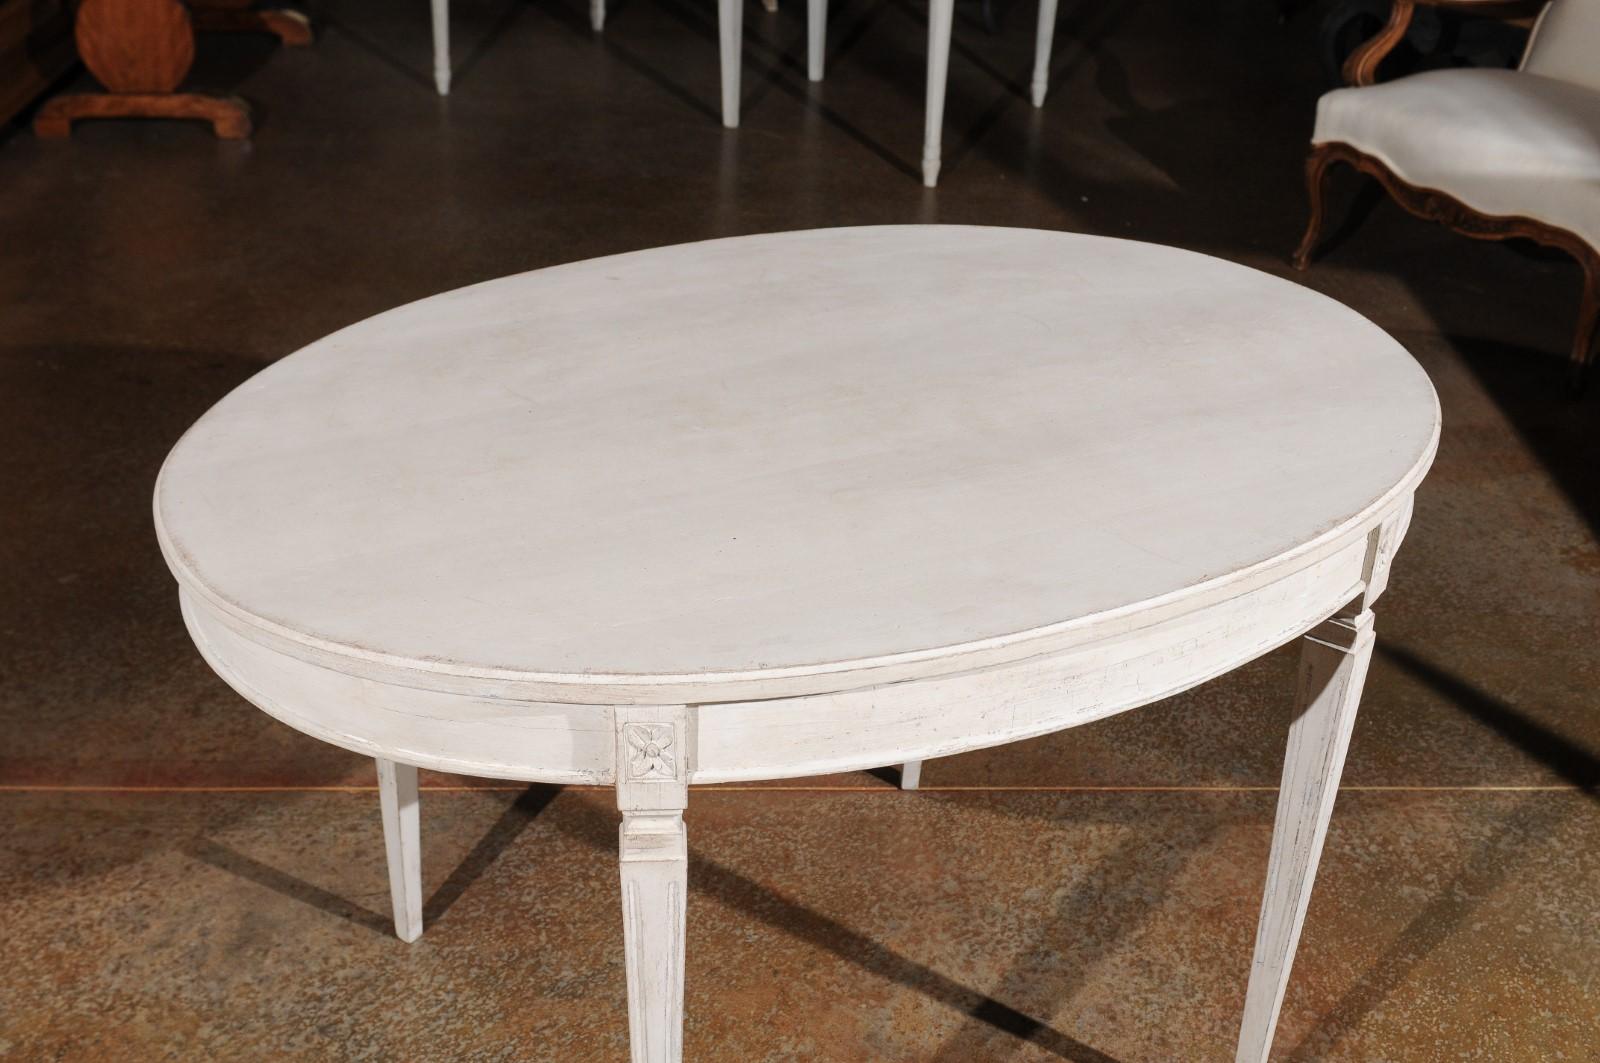 19th Century Swedish Gustavian Style Painted Wood Oval Table with Tapered Legs, circa 1880